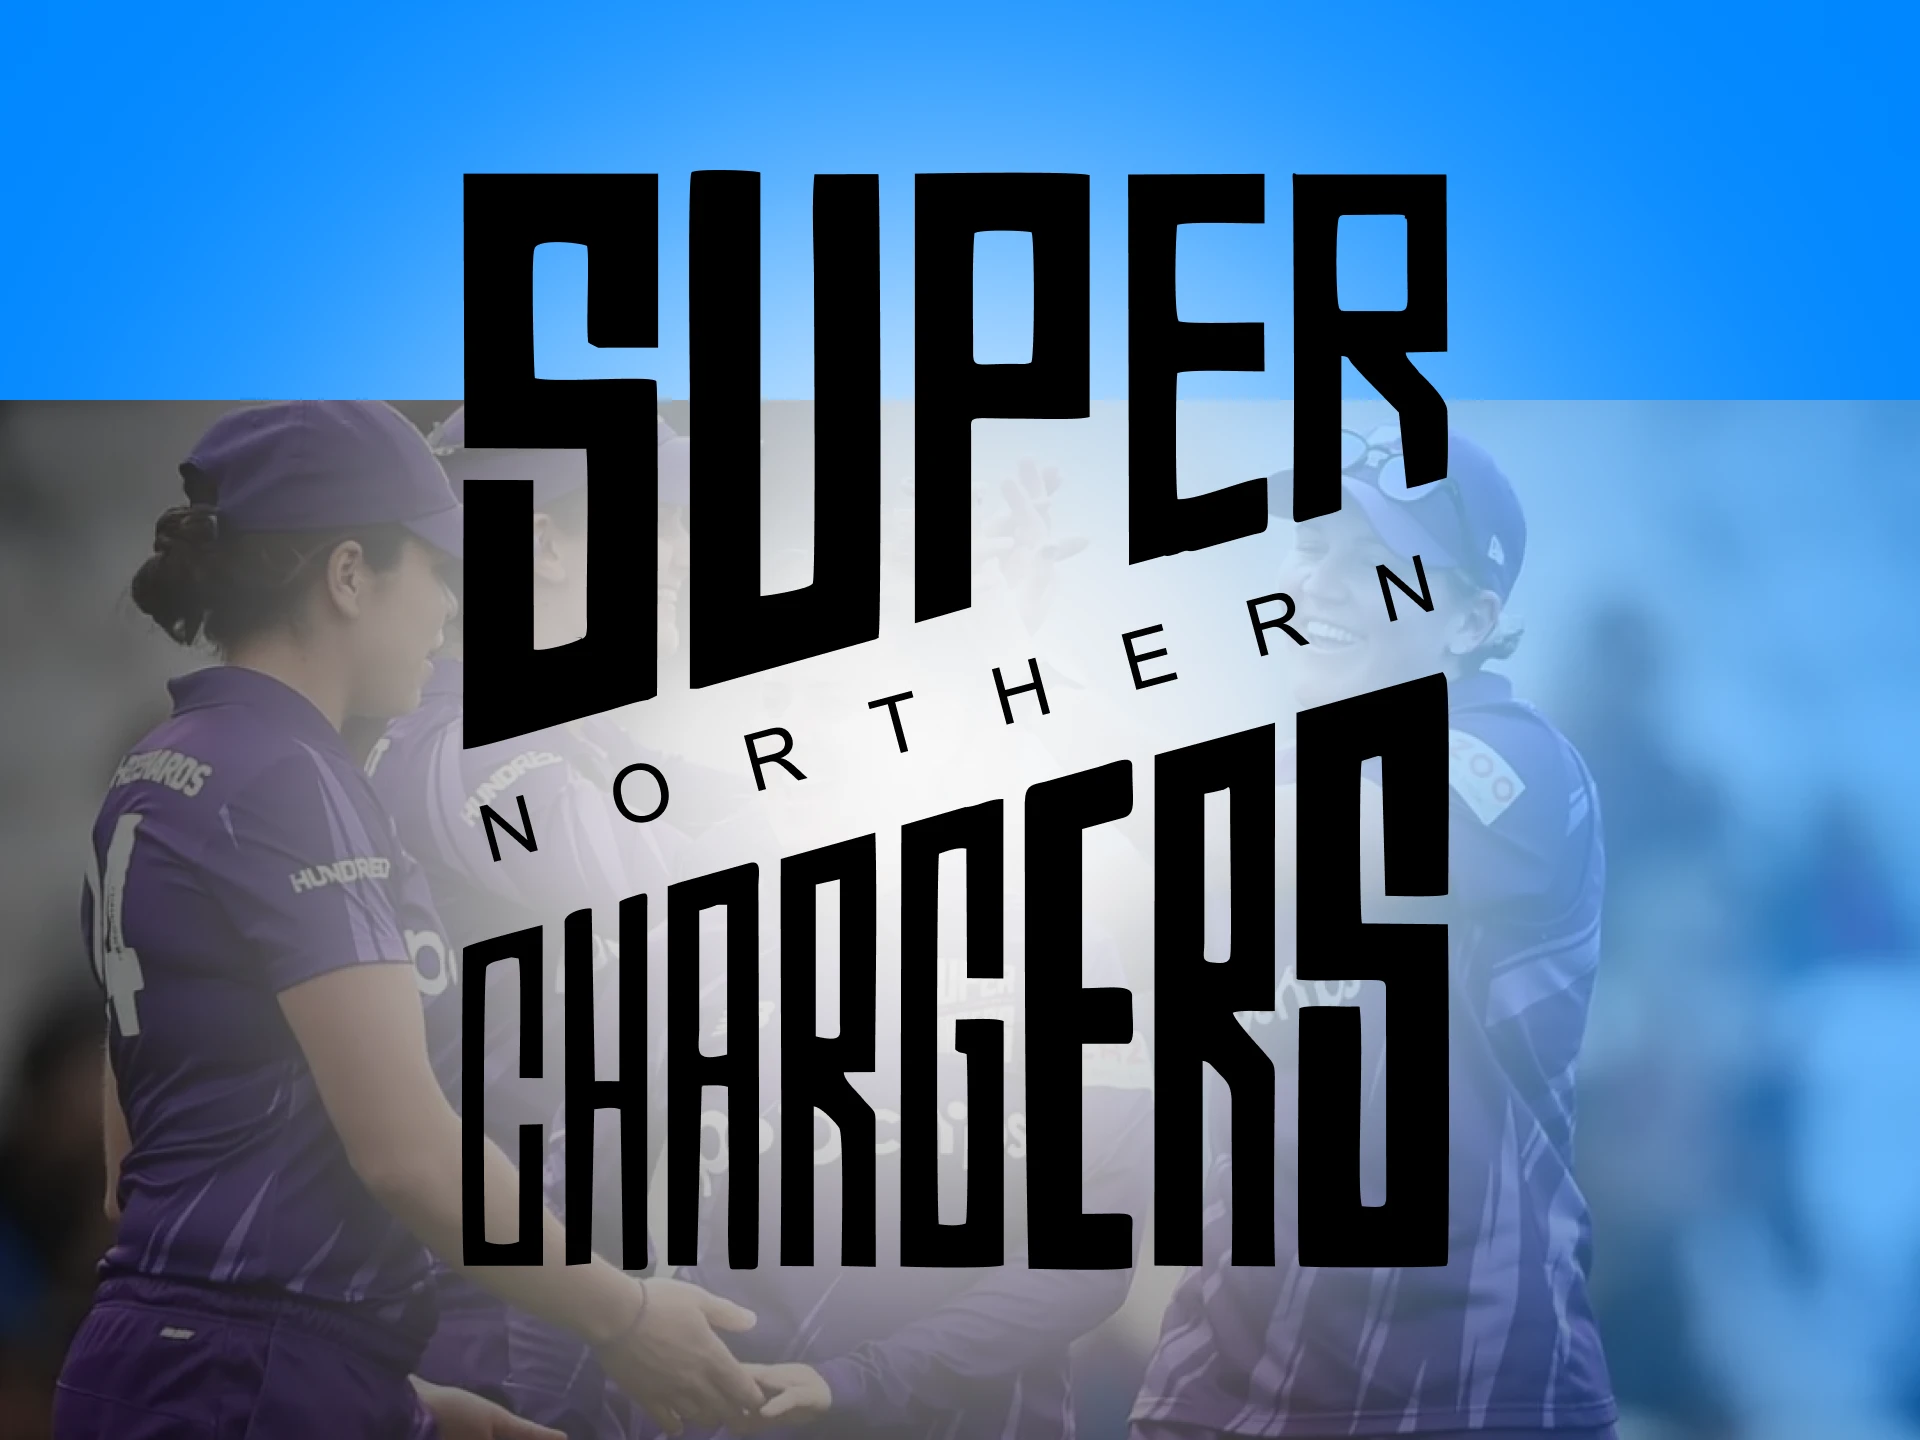 Northern Superchargers is a great team to watch their matches.